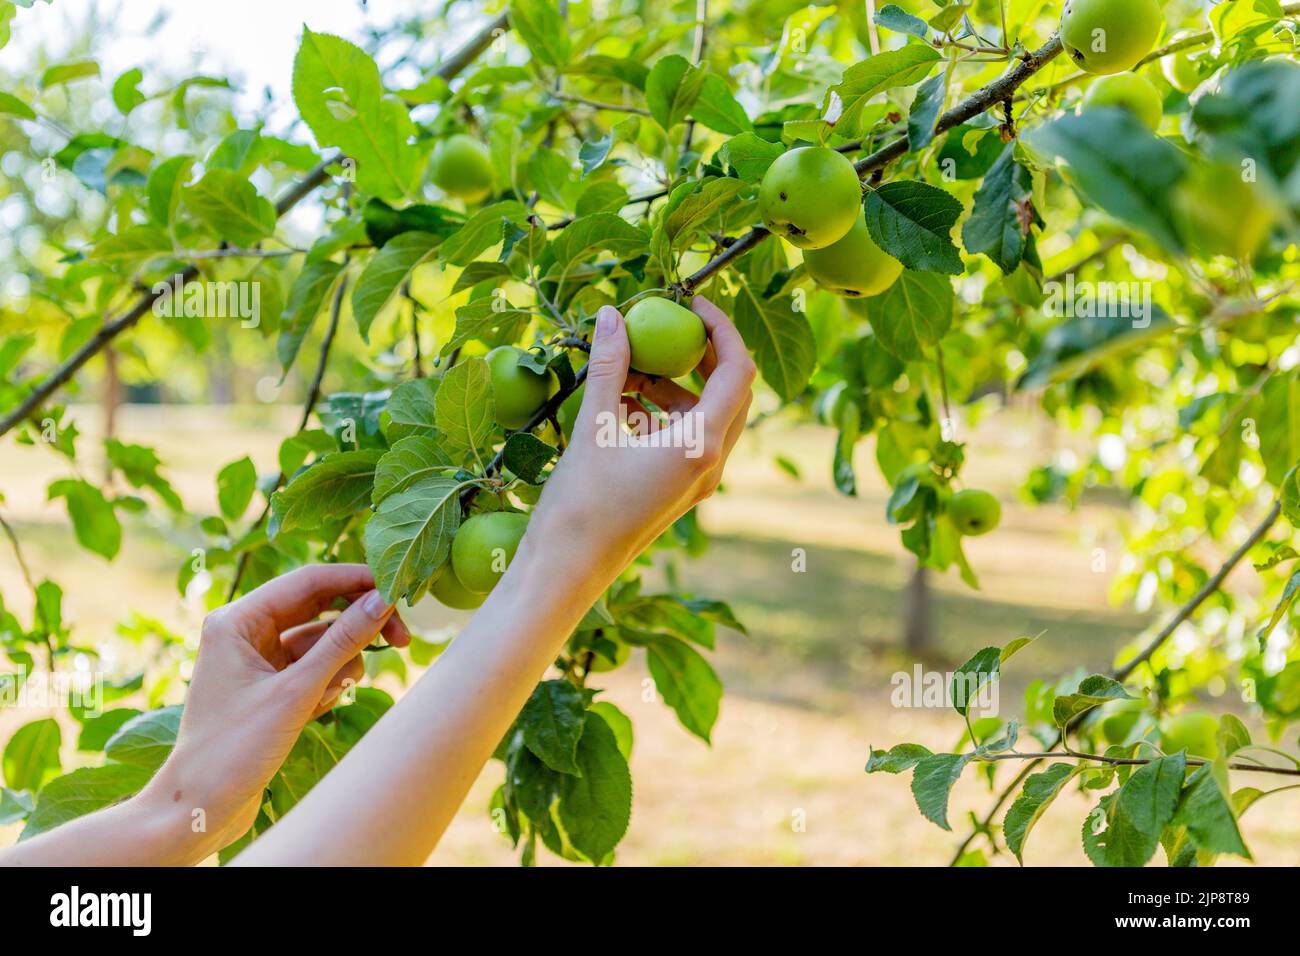 Two hands holding an apple tree brunch collecting green apples. Stock Photo